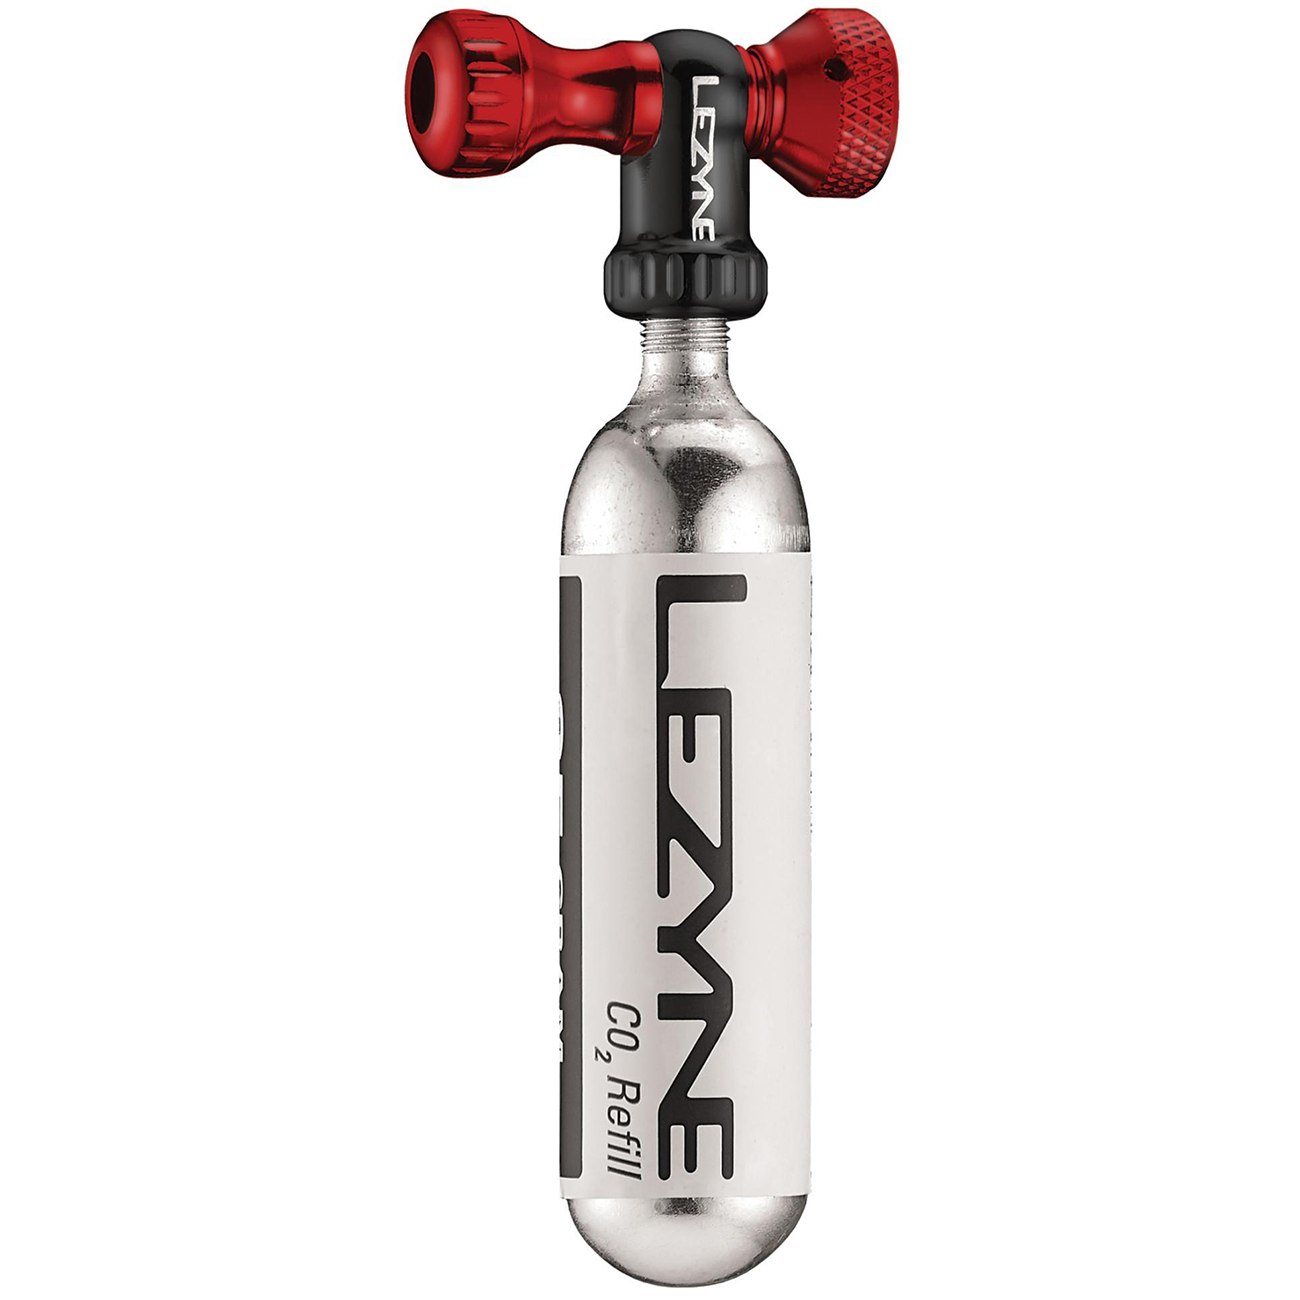 Image of Lezyne Control Drive CO2 Cartridge Pump - 16g - red